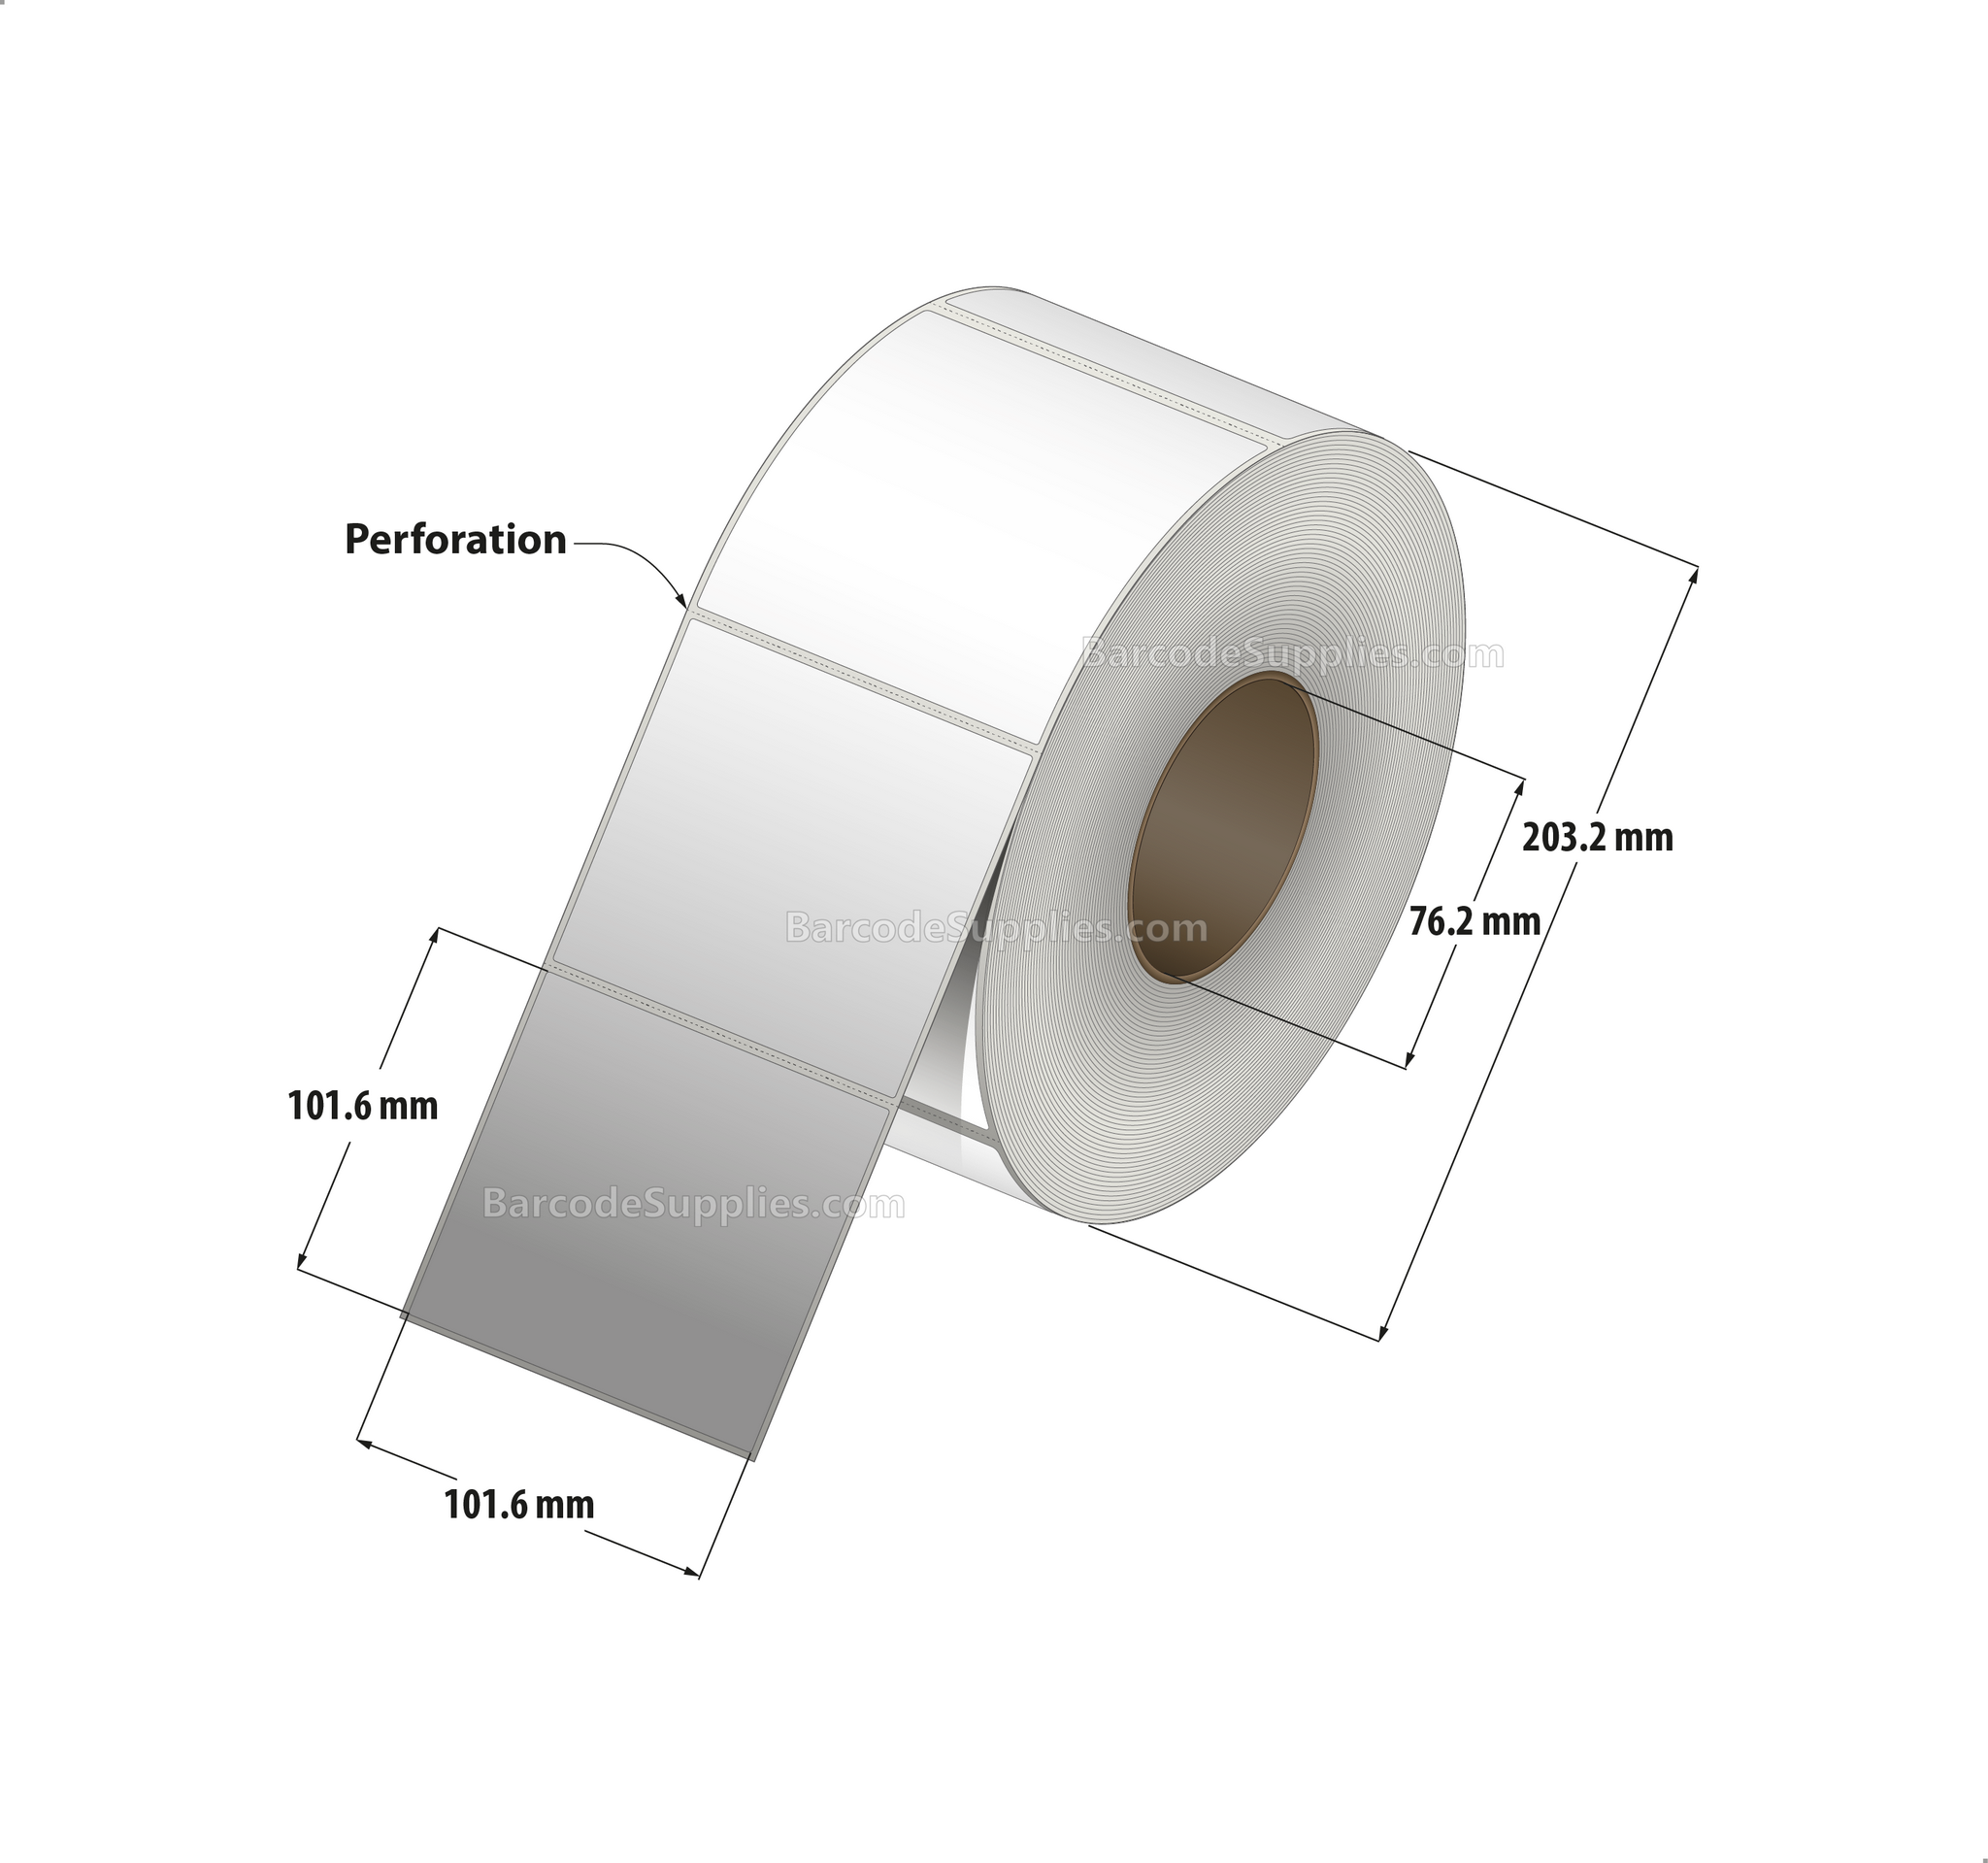 4 x 4 Thermal Transfer White Labels With Permanent Adhesive - Perforated - 1500 Labels Per Roll - Carton Of 4 Rolls - 6000 Labels Total - MPN: RSP-4-4-1500-3